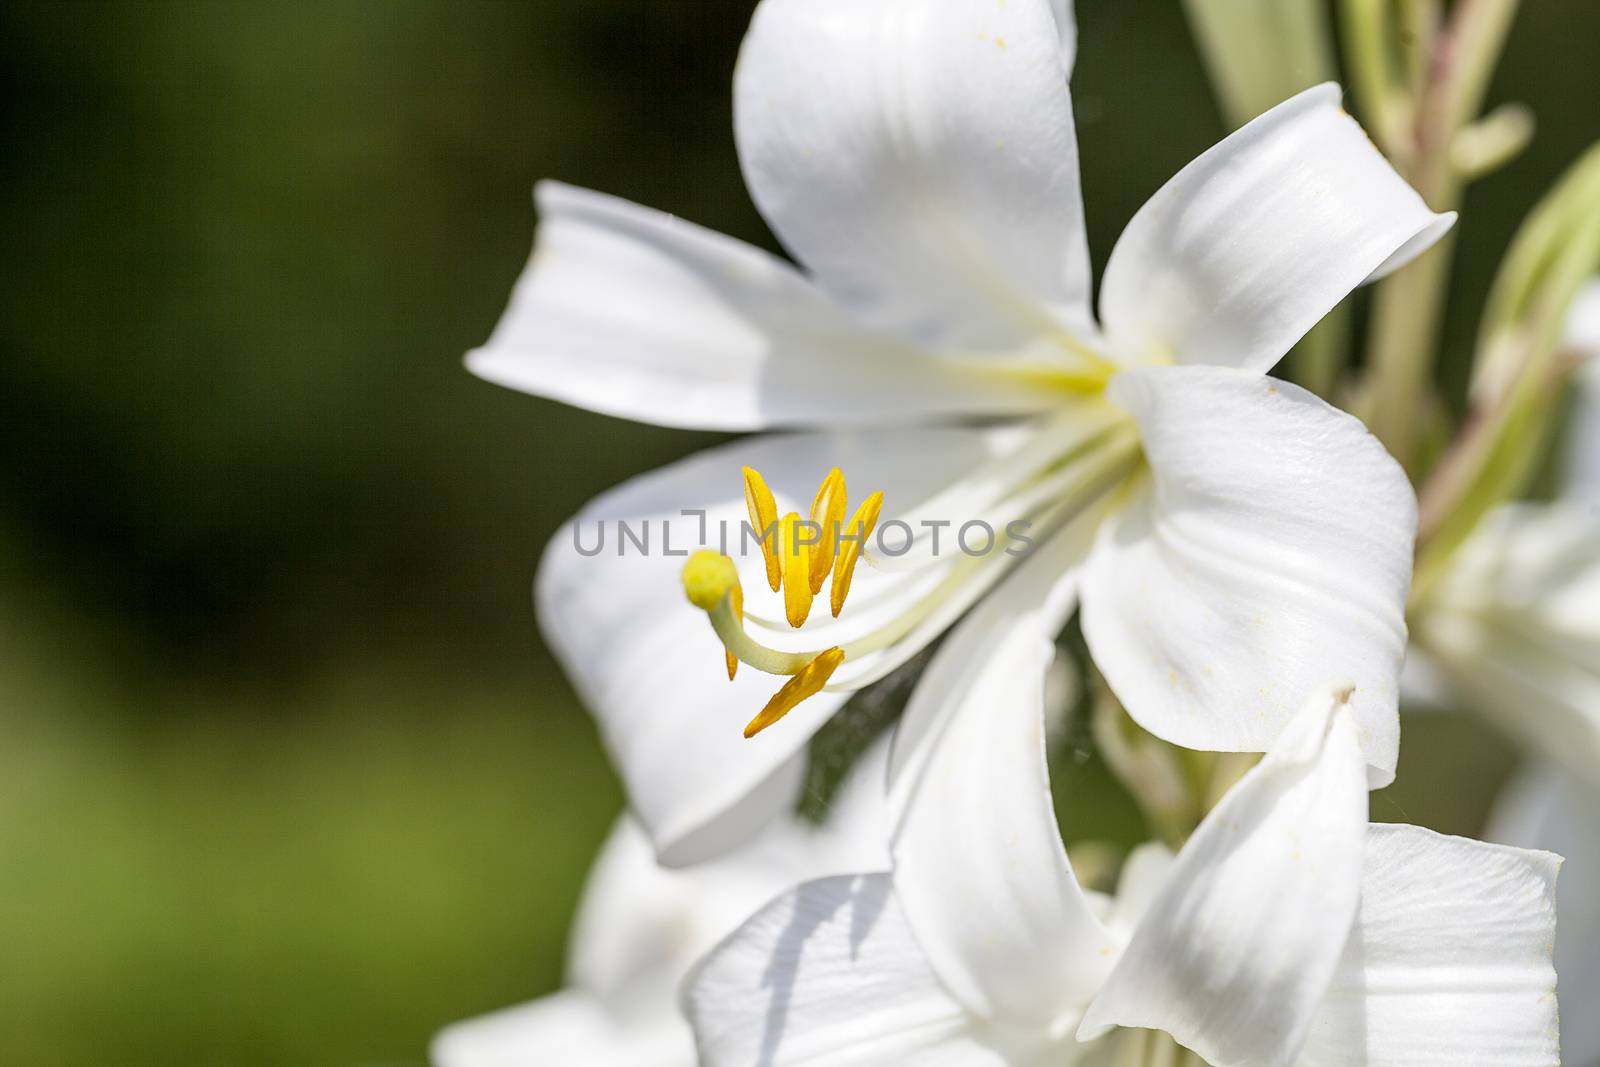 Flowers of white Lilium candidum blooming in the garden .